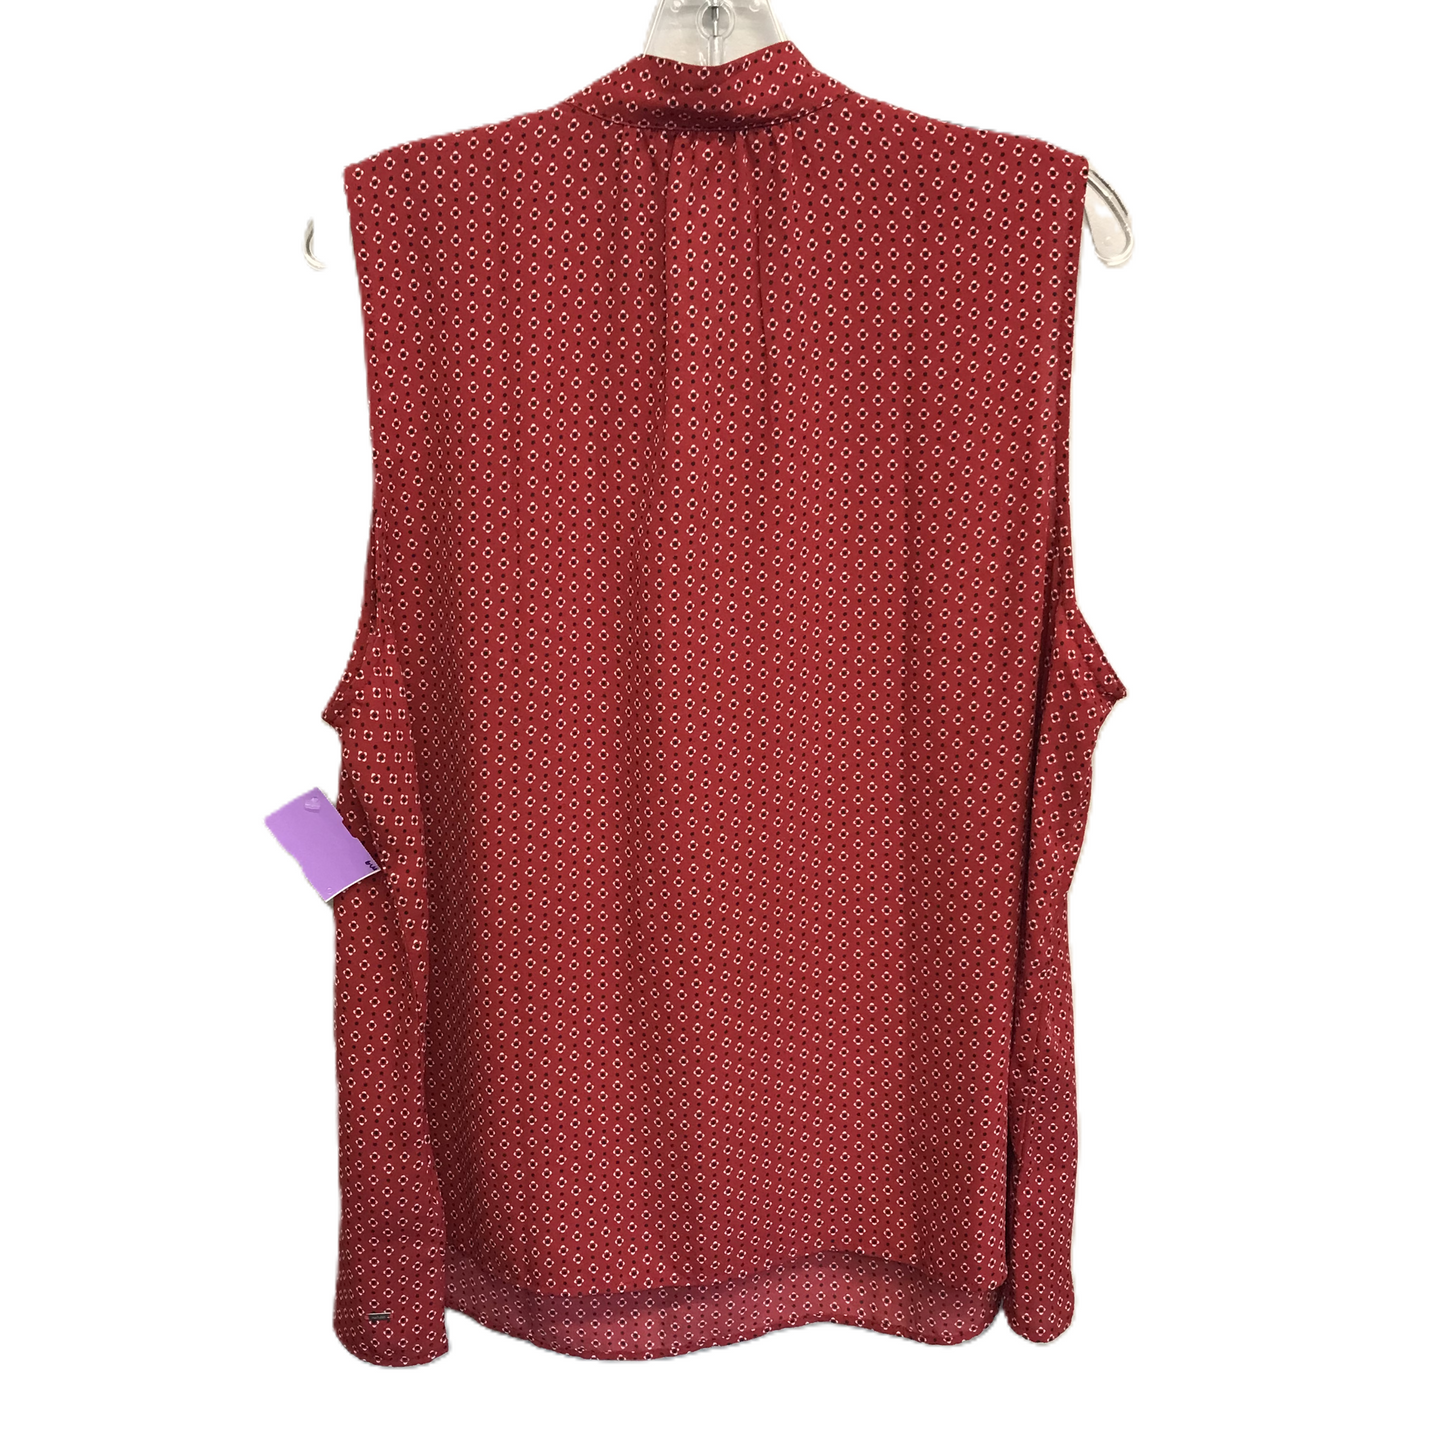 Red Top Sleeveless By Tommy Hilfiger, Size: 1x